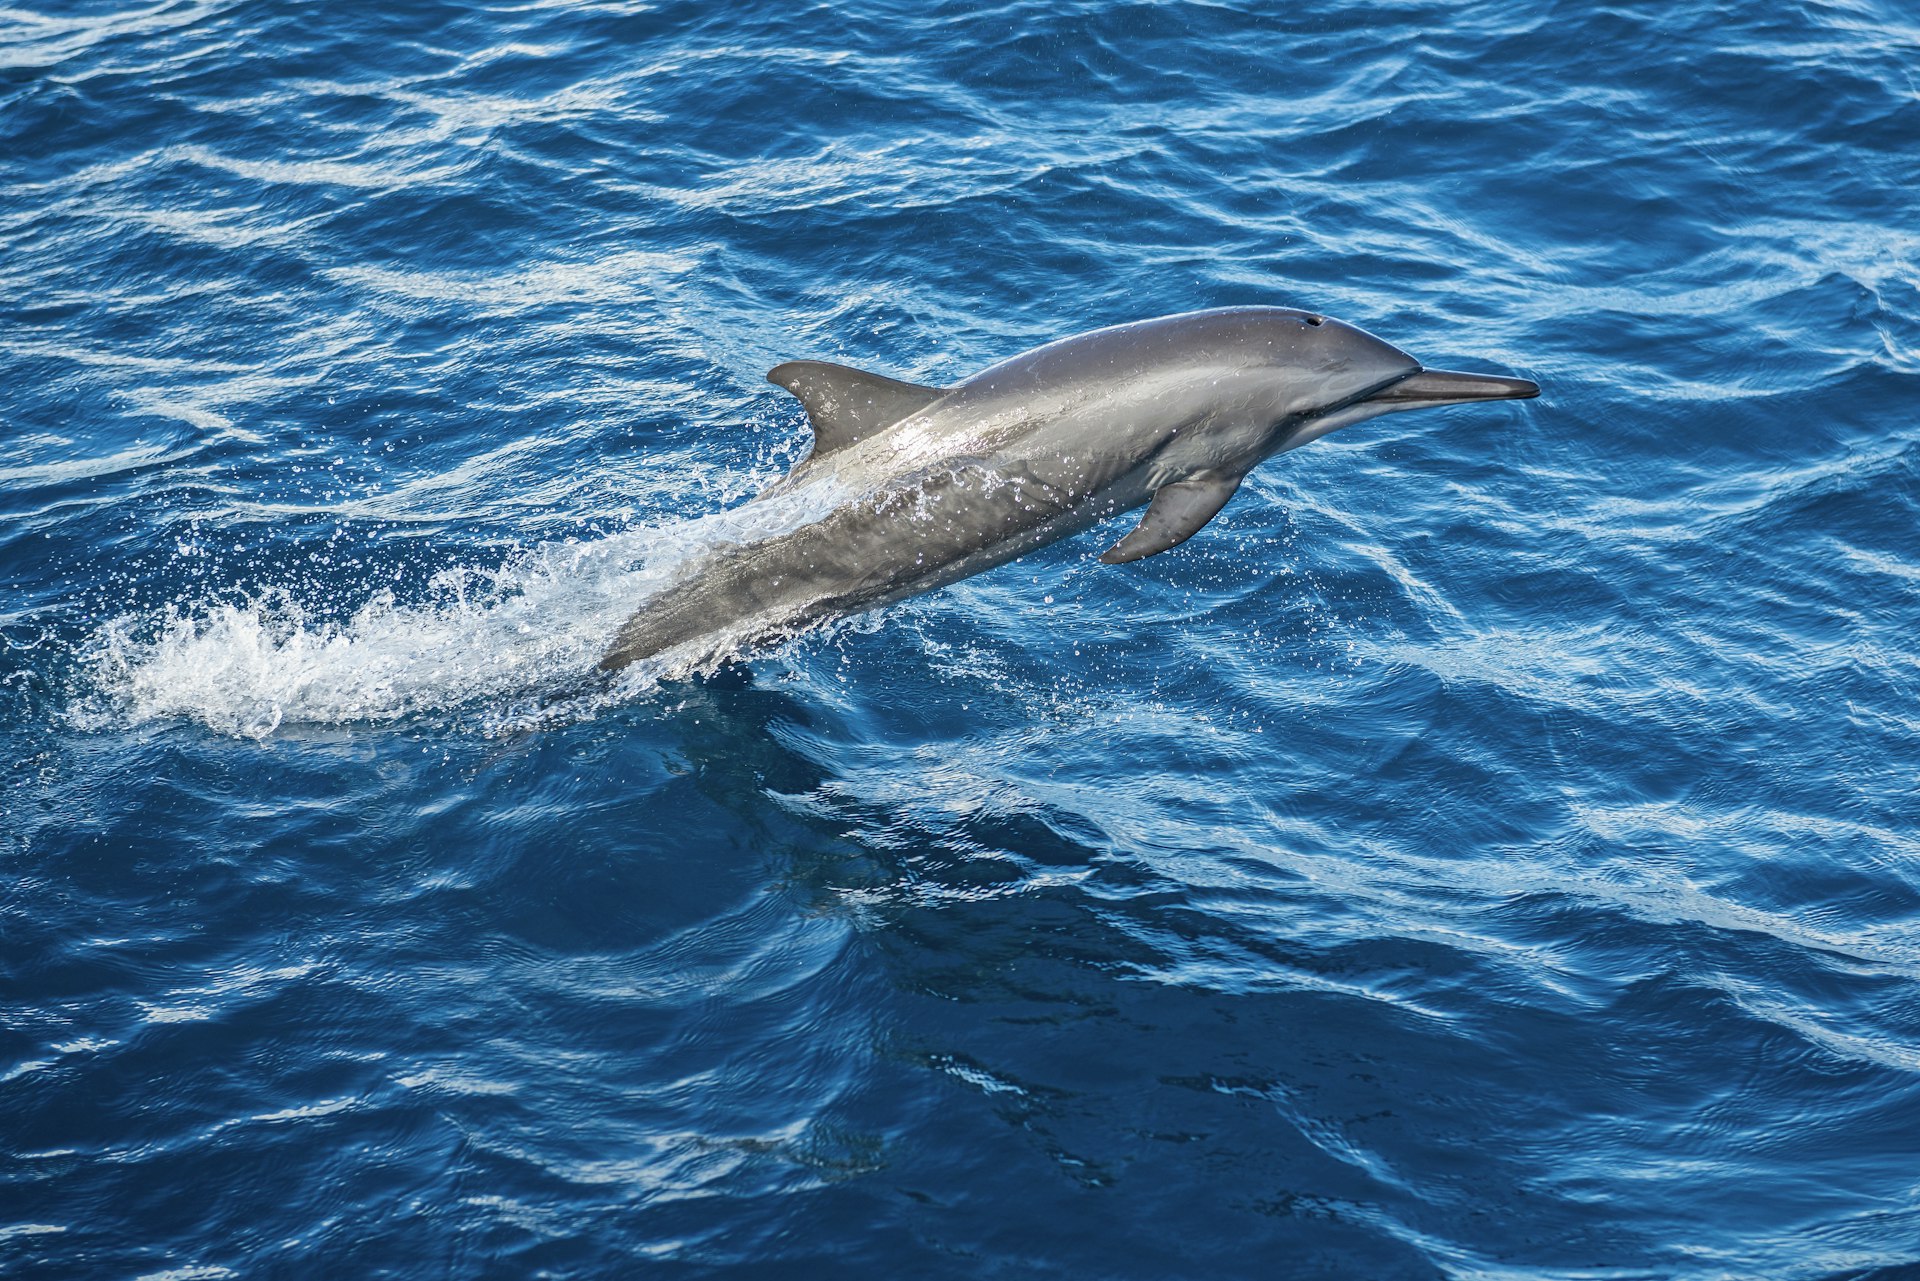 A spinner dolphin leaping in the turquoise waters of the Indian Ocean